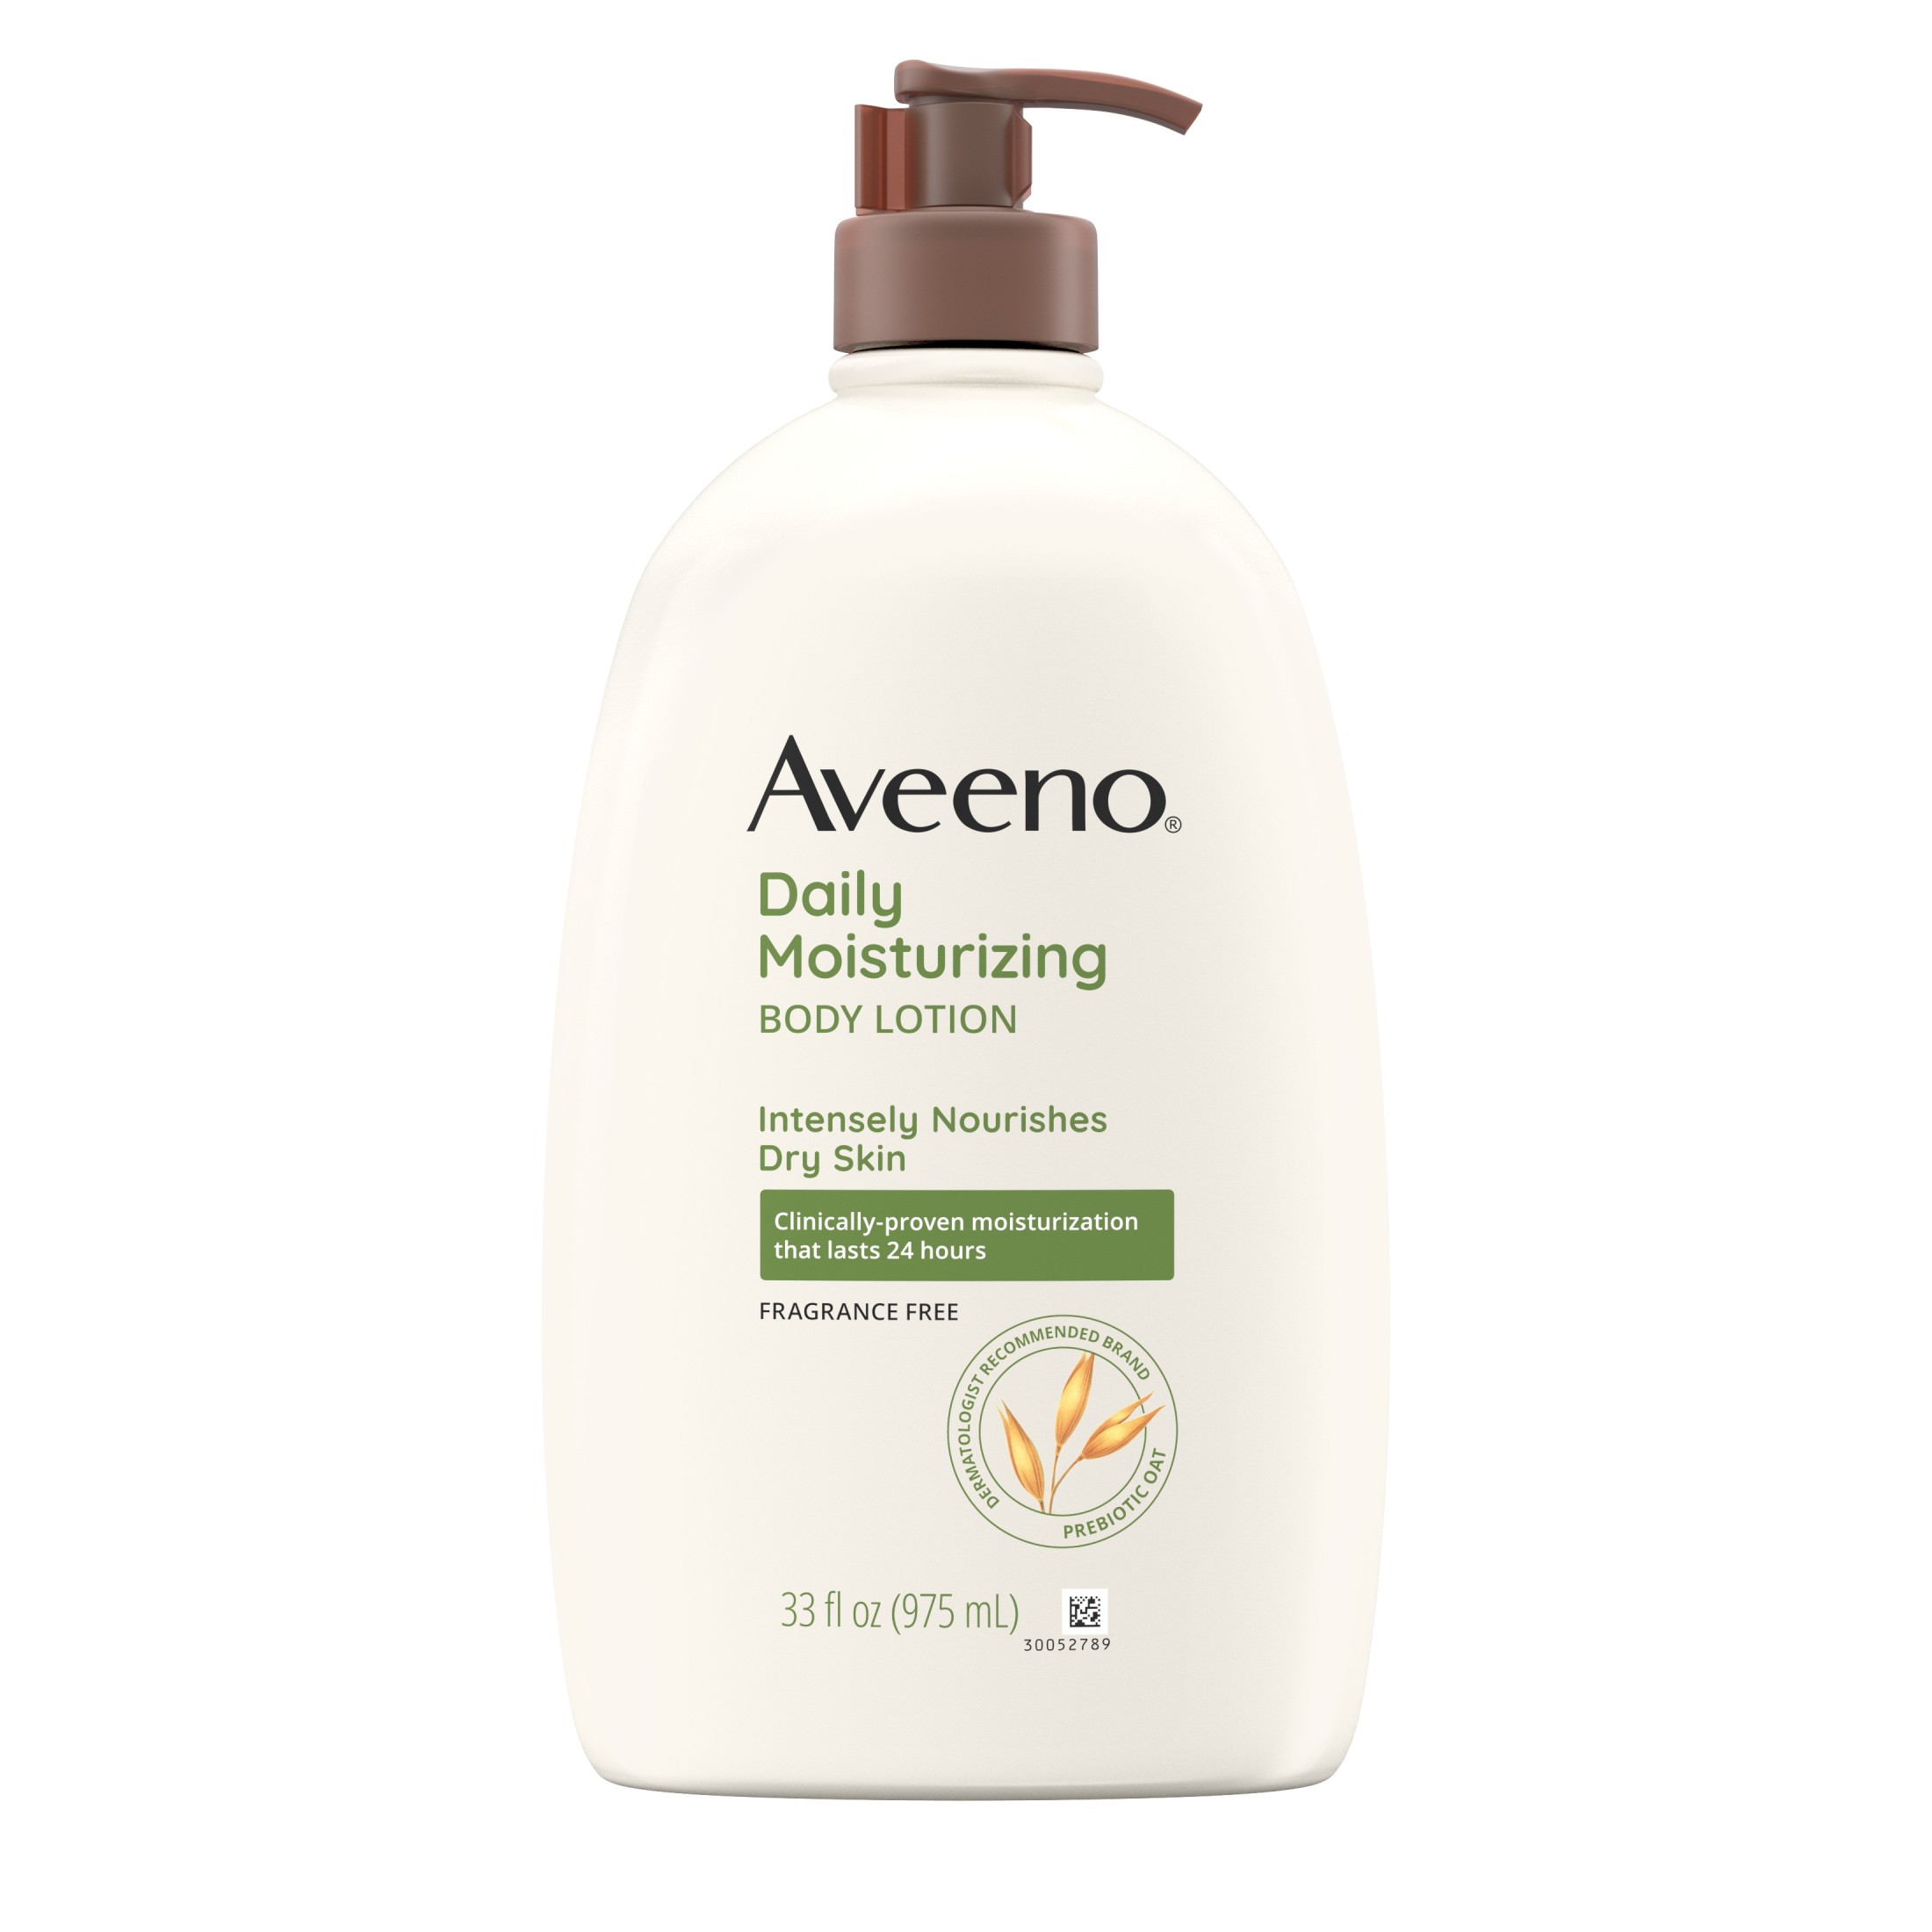 Aveeno Daily Moisturizing Body Lotion and Facial Moisturizer for Face, Body and Dry Skin, 33 oz